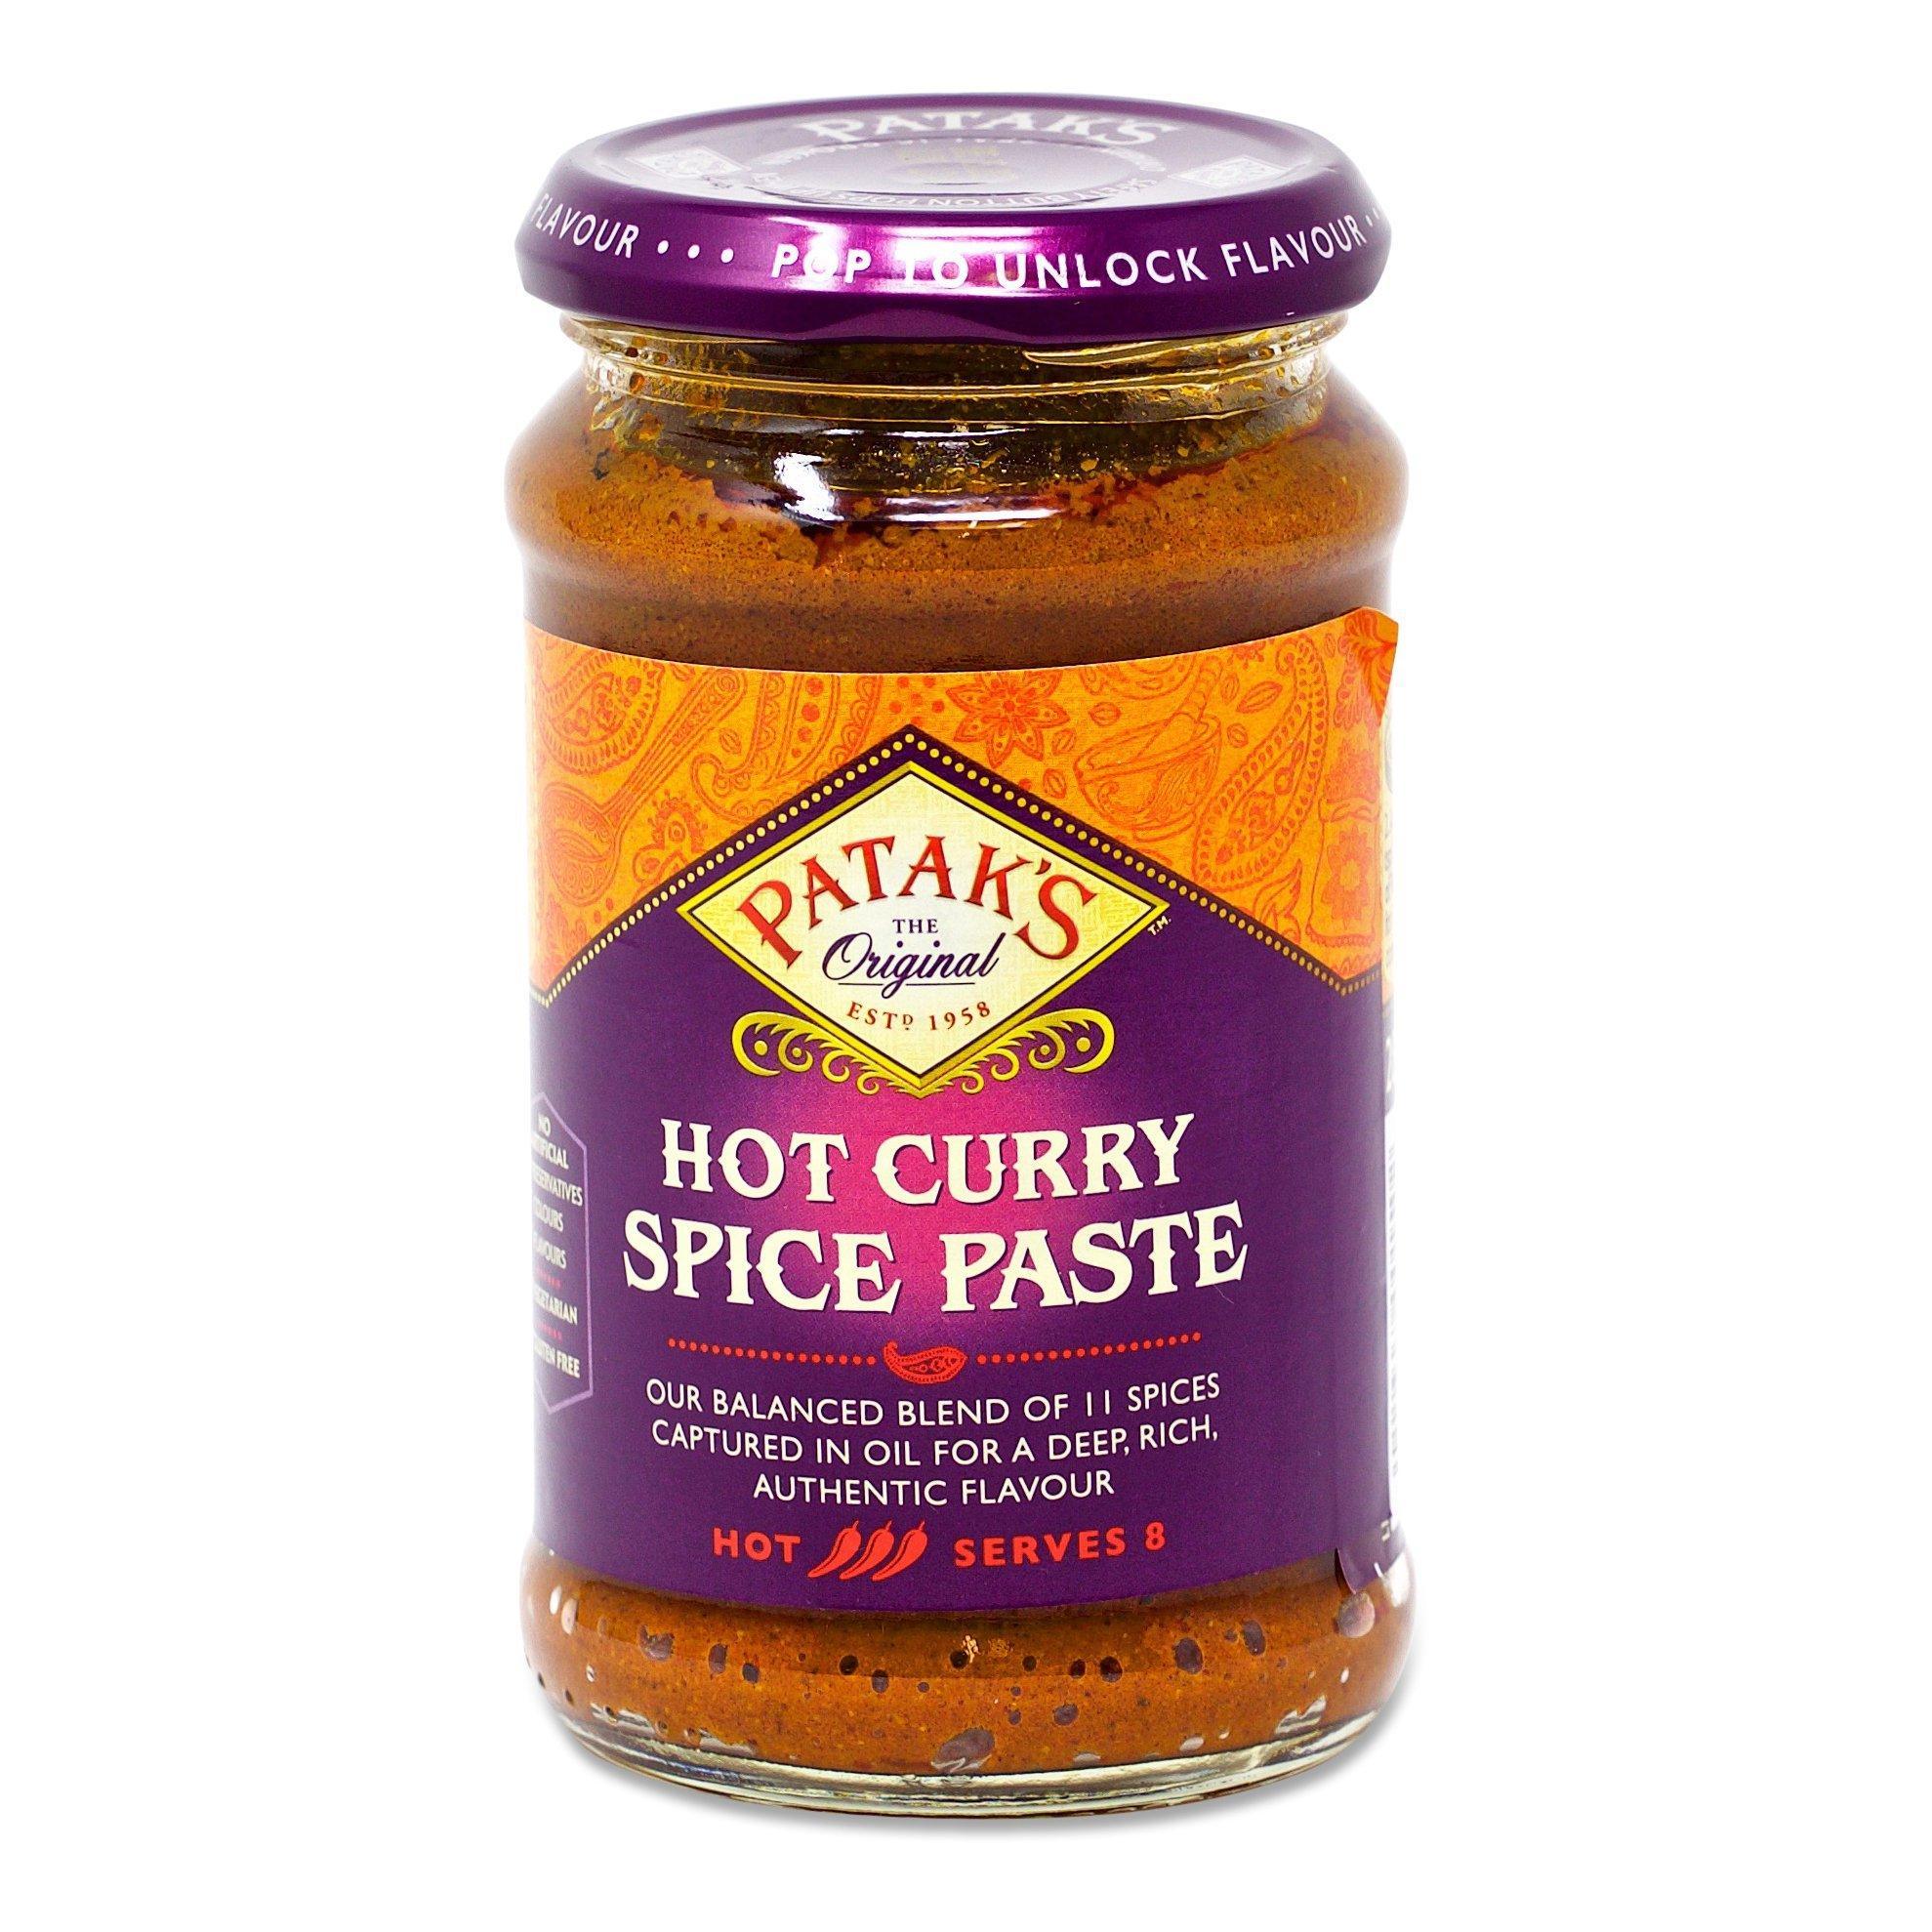 Pataks Hot Curry Spice Paste (300g) | {{ collection.title }}